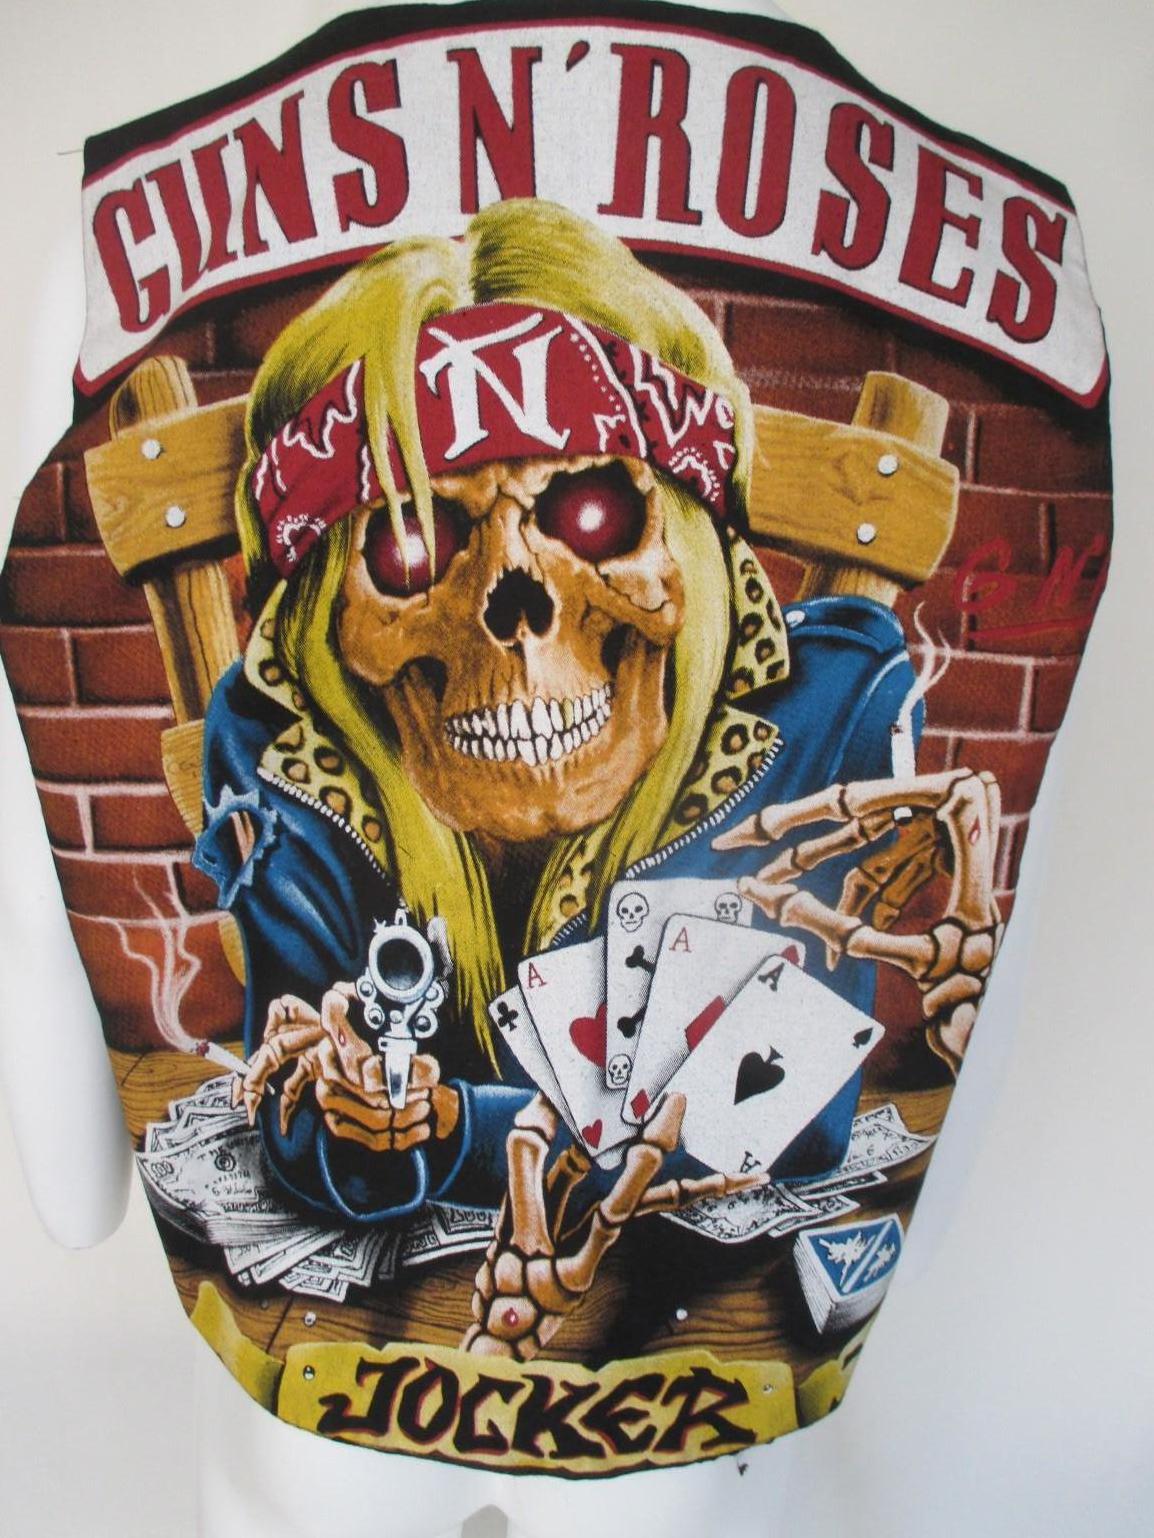 --Collectors-item--  Guns & Roses vintage
 This is an amazing and very rare piece of collection for Guns n roses fans from the early 90's with the front and back fully printed.
The vest has 4 buttons
Color black
Its in good vintage condition 
It can